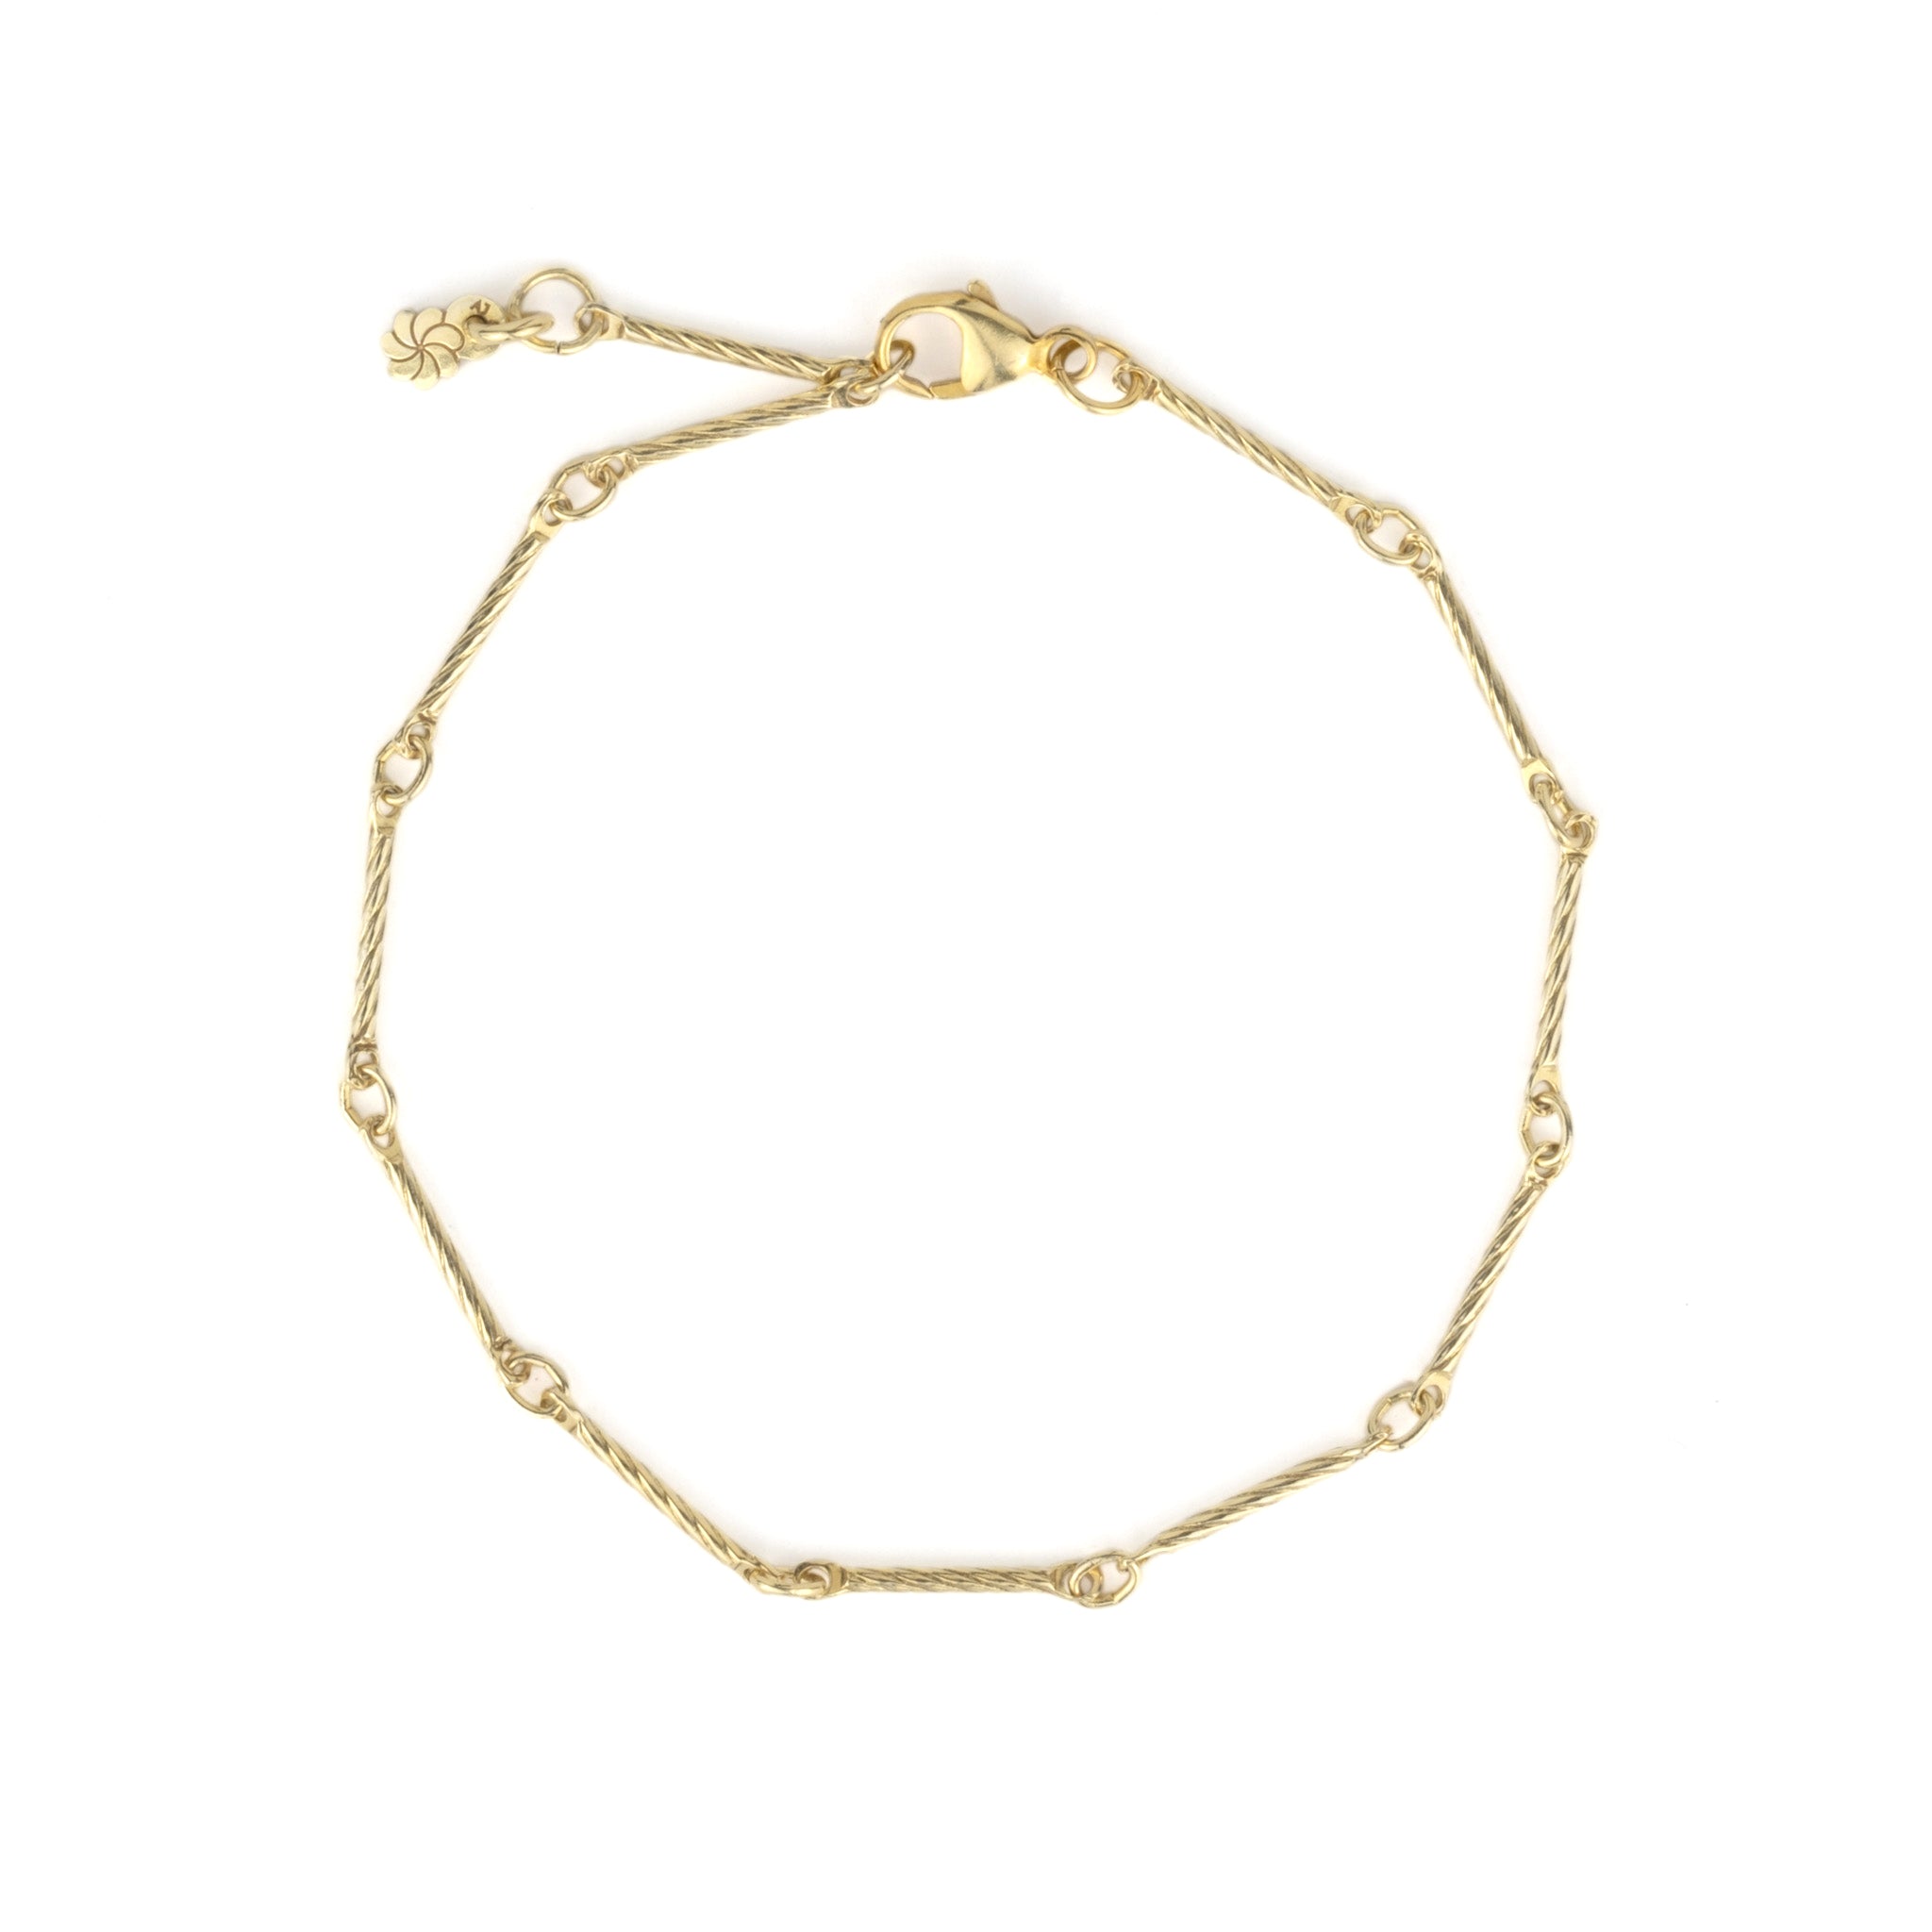 A solid 9k yellow gold Aiden Jae Banyan Bar Chain Bracelet with twisted texture & links on a white background.